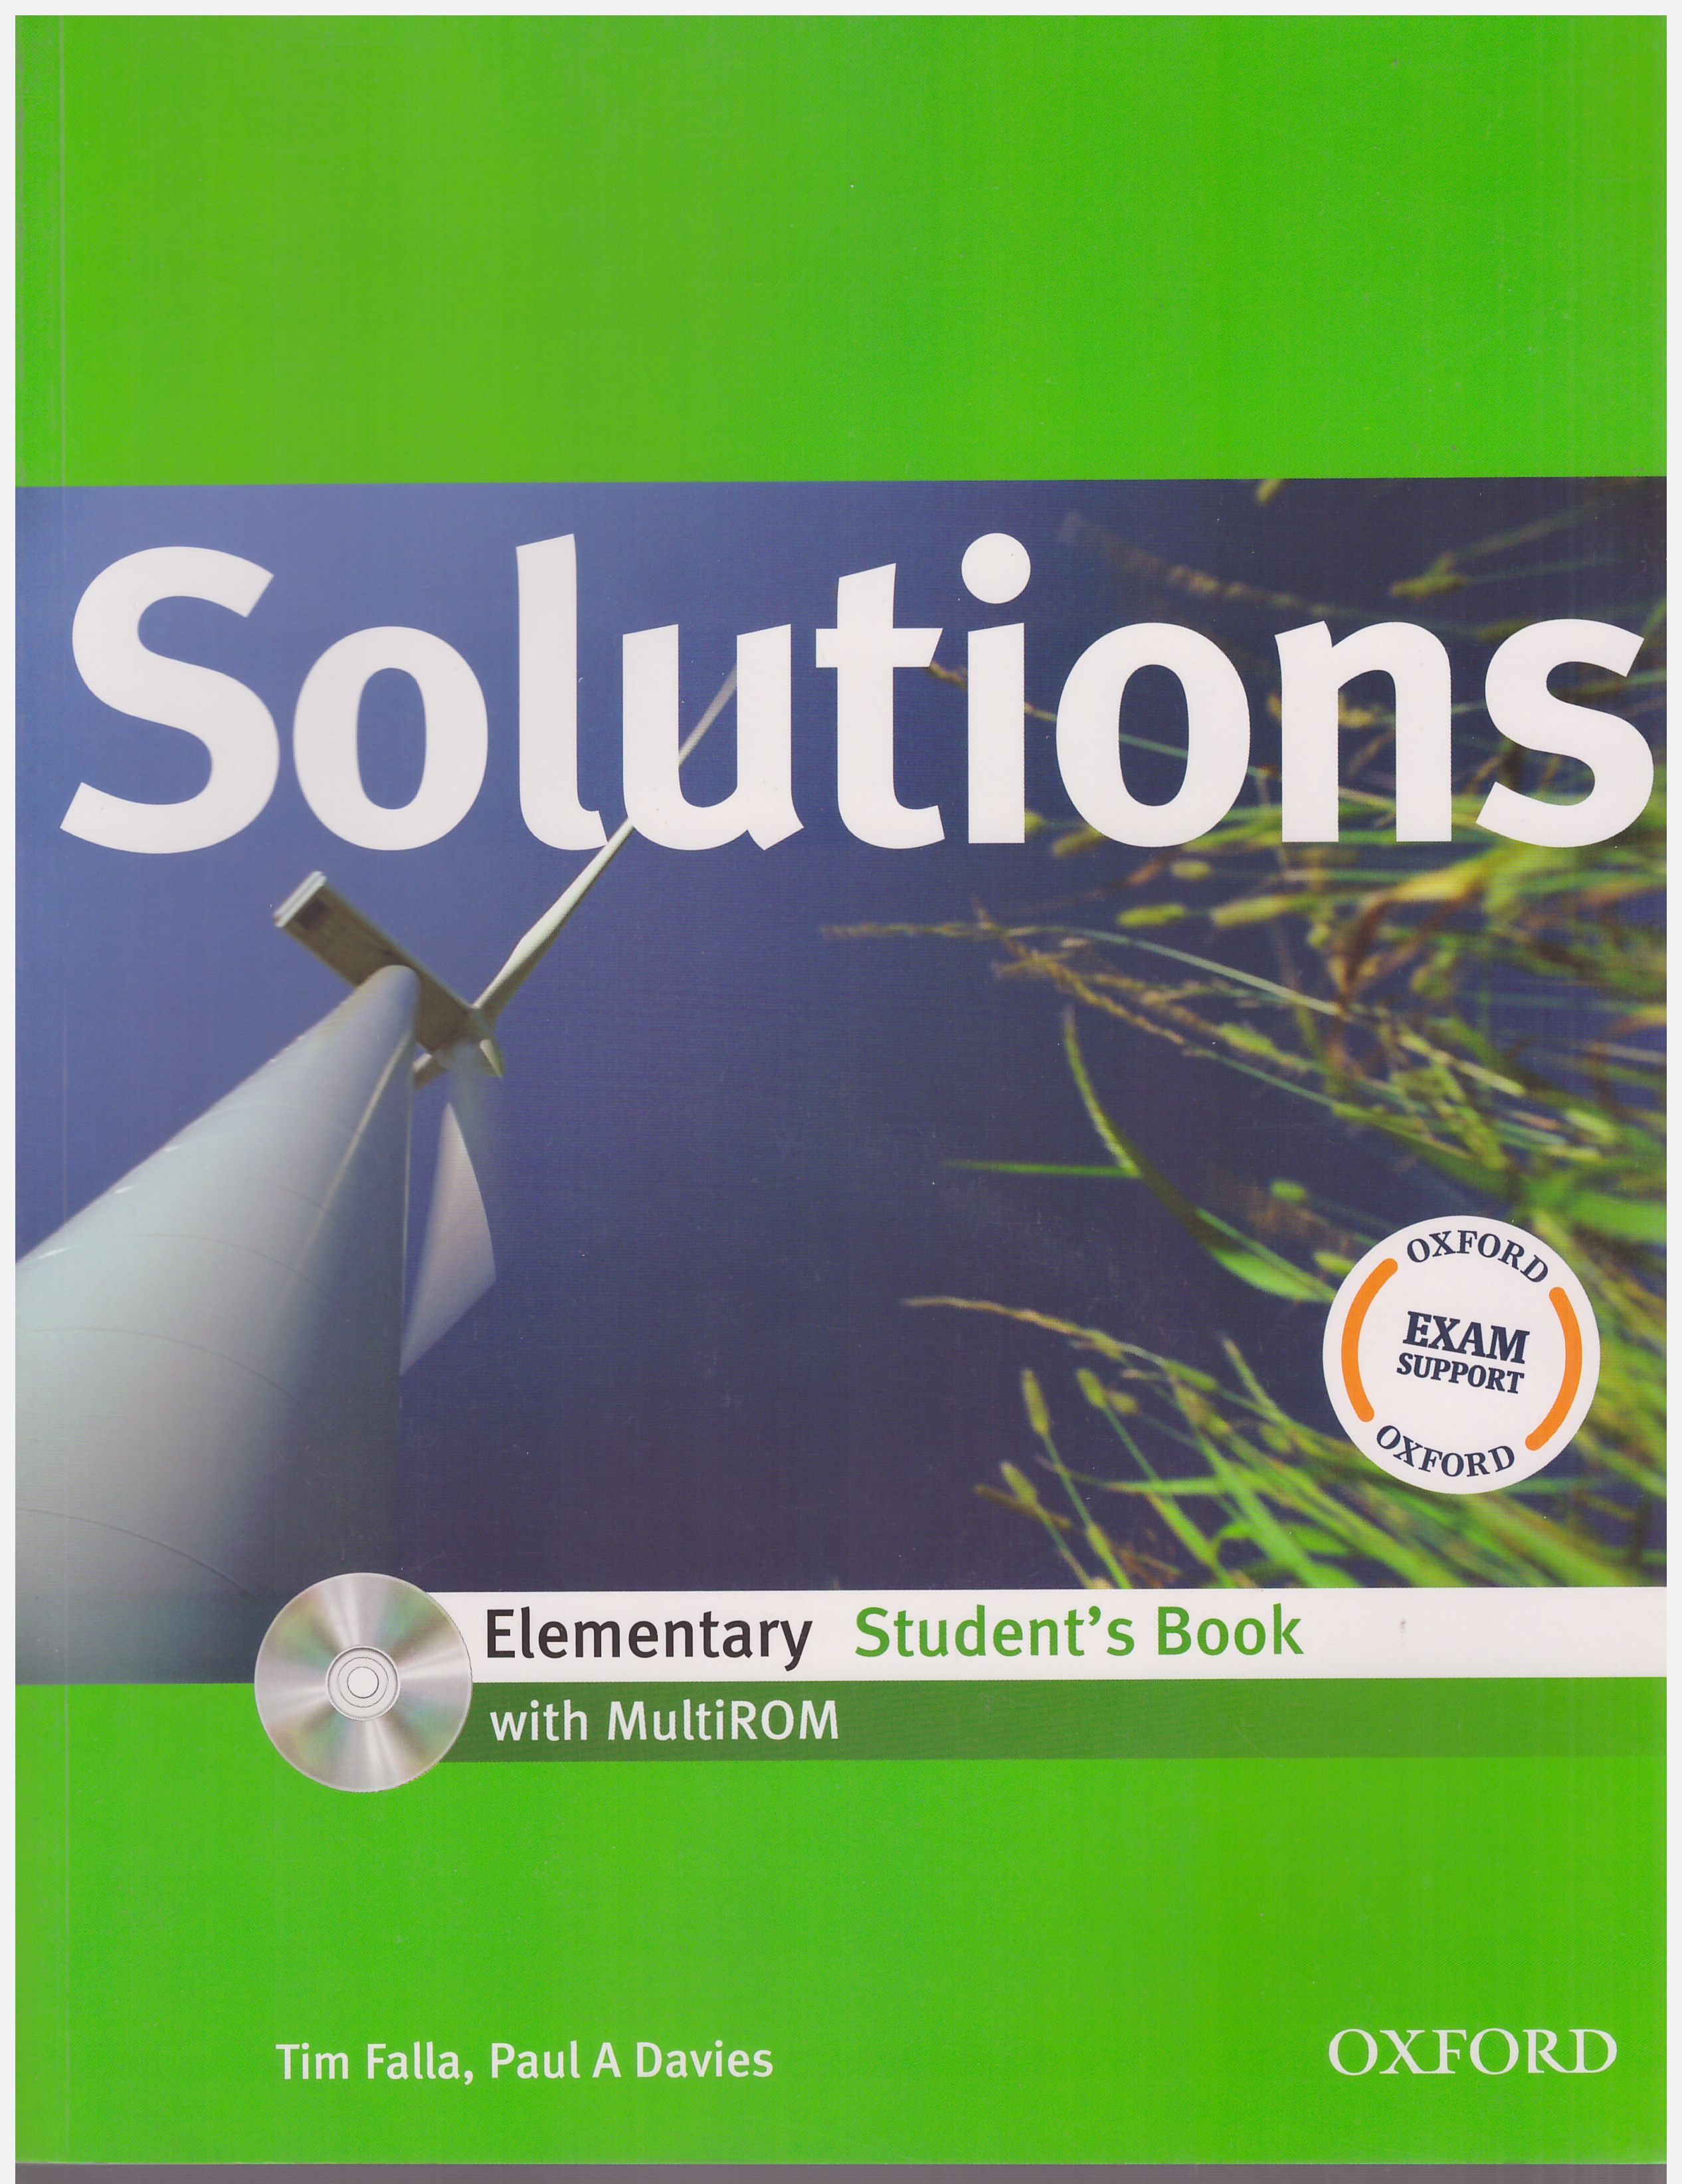 Solutions elementary 6 класс